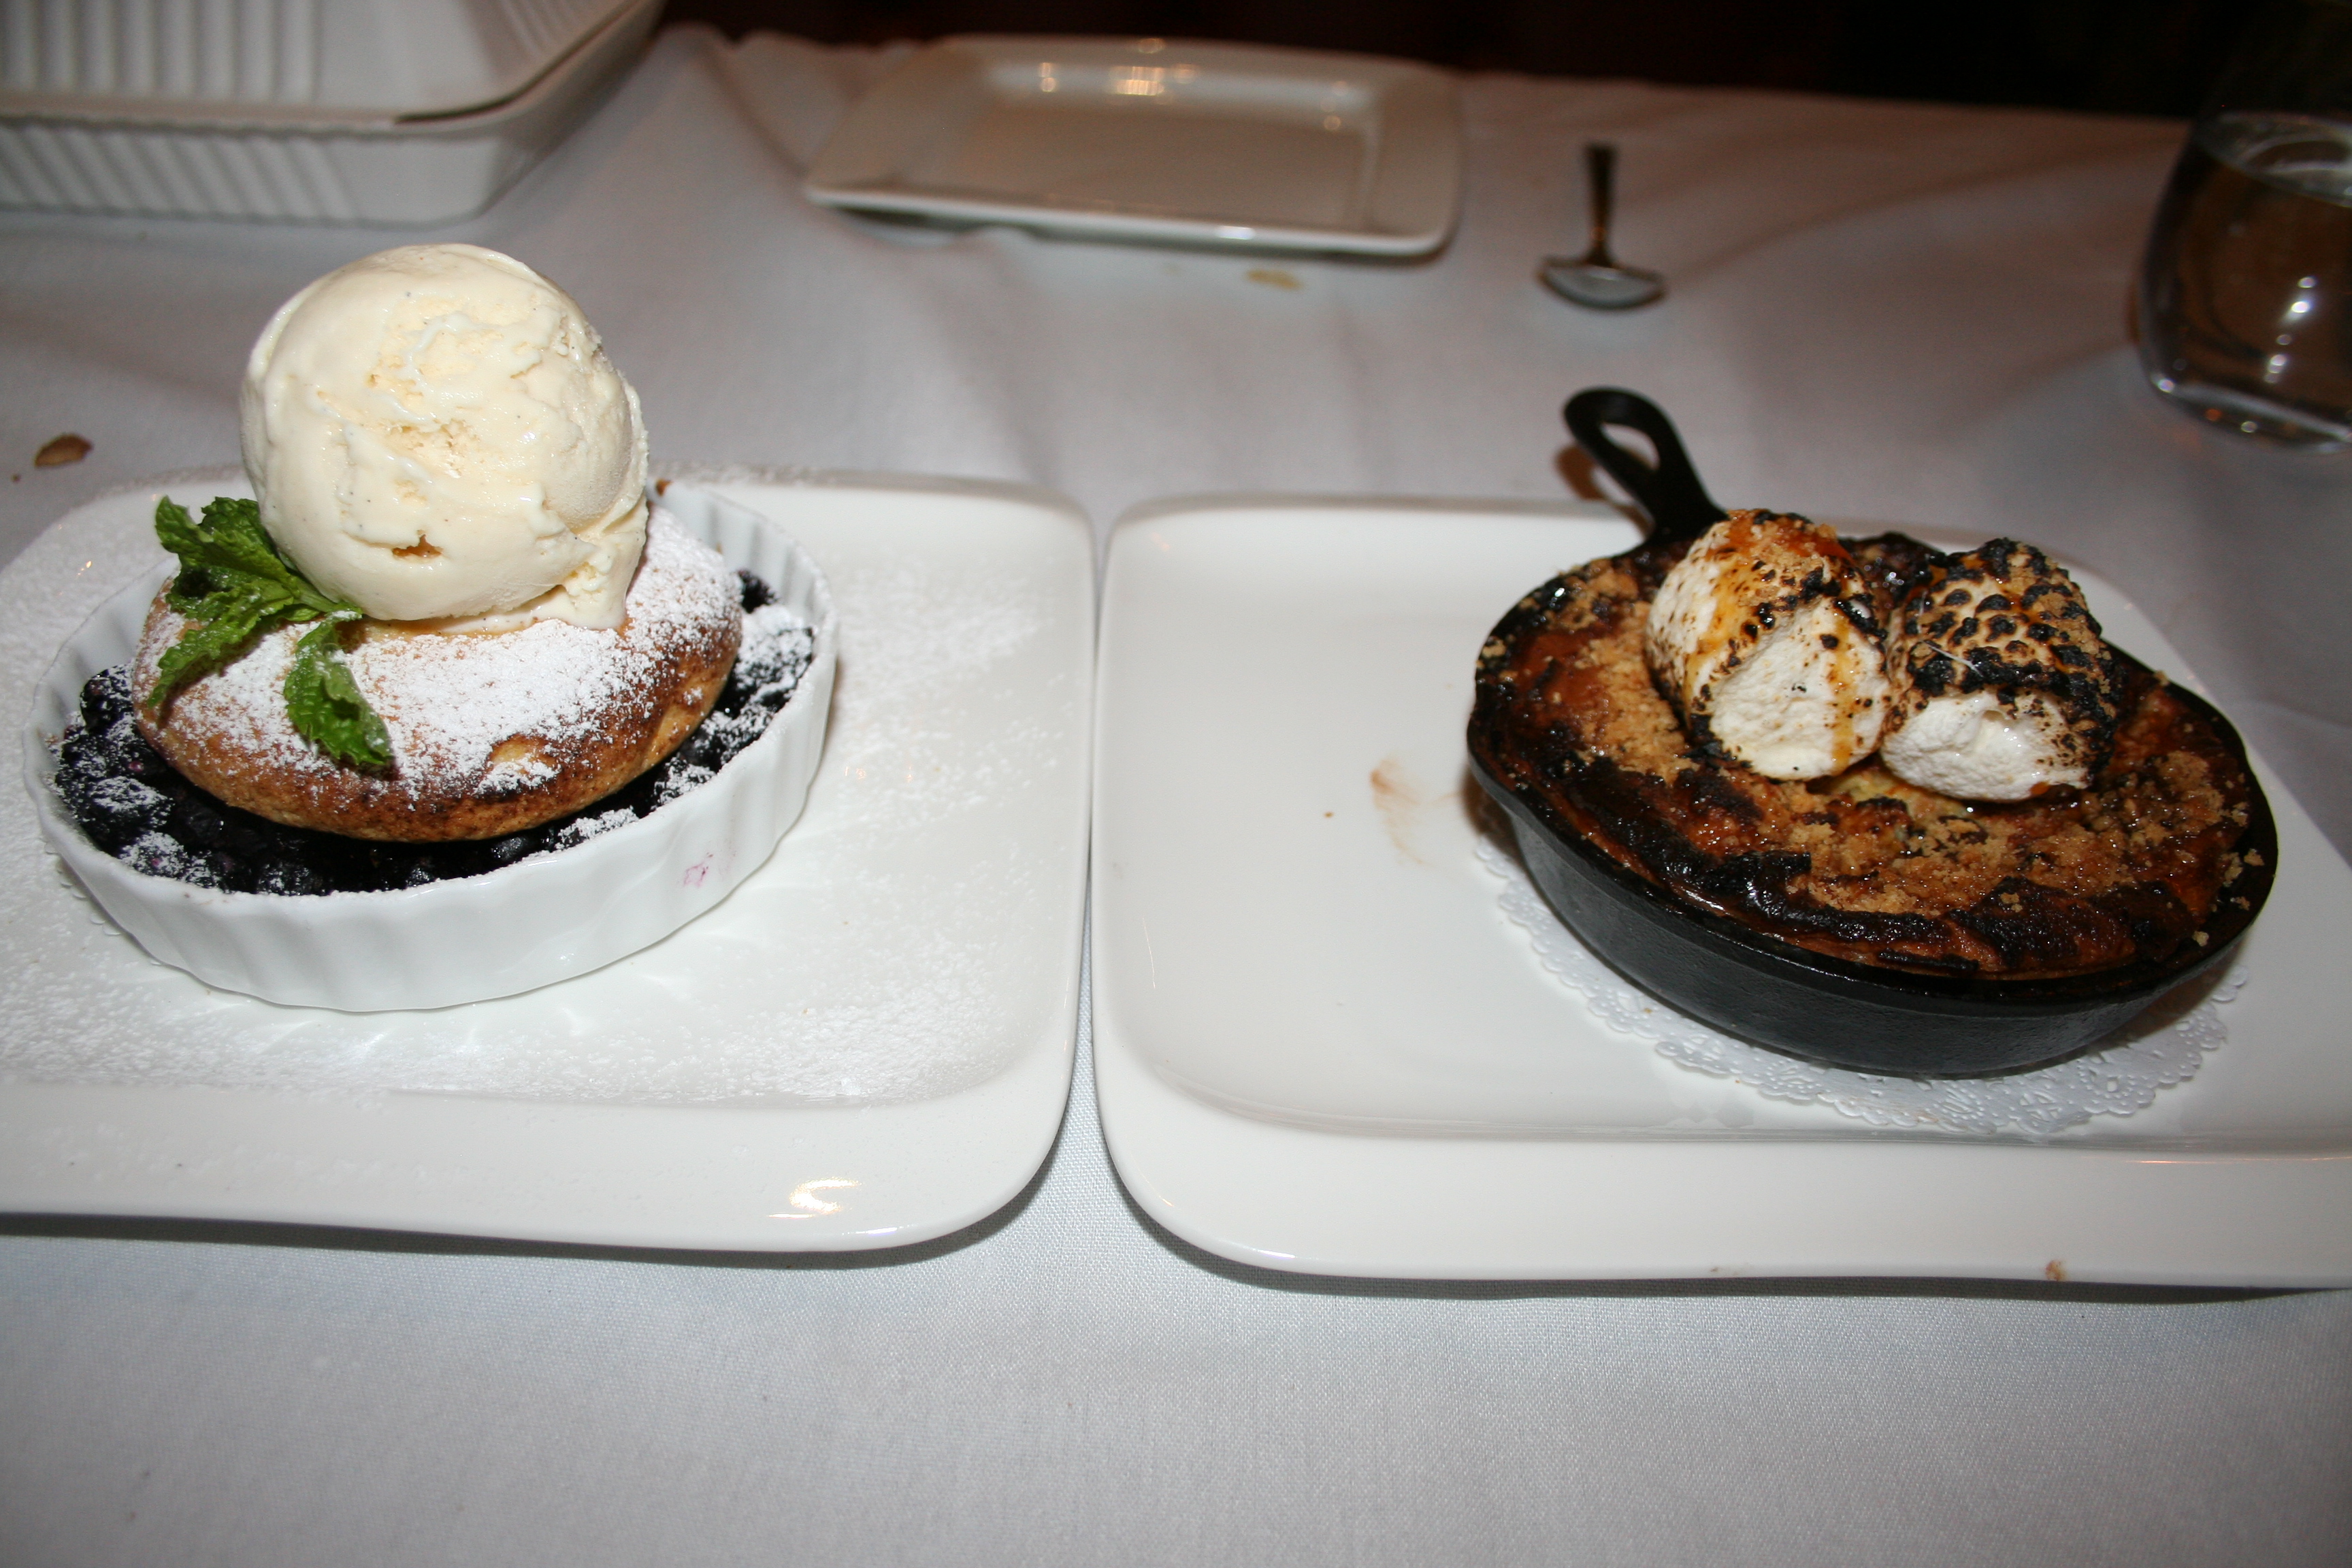 The blueberry cobbler (left) had an odd flavor of tarragon and a hair, while the s'mores bread pudding was dry and didn't have enough chocolate. (Photo: Mark Heckathorn/DC on Heels)